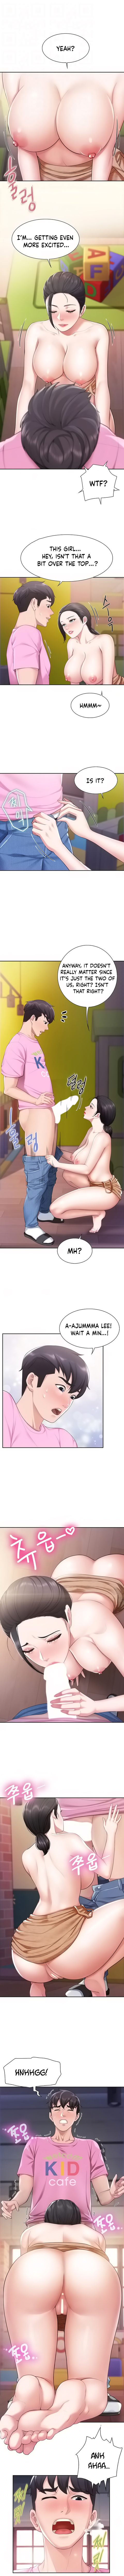 Welcome to Kids Cafe - Chapter 5 Page 3